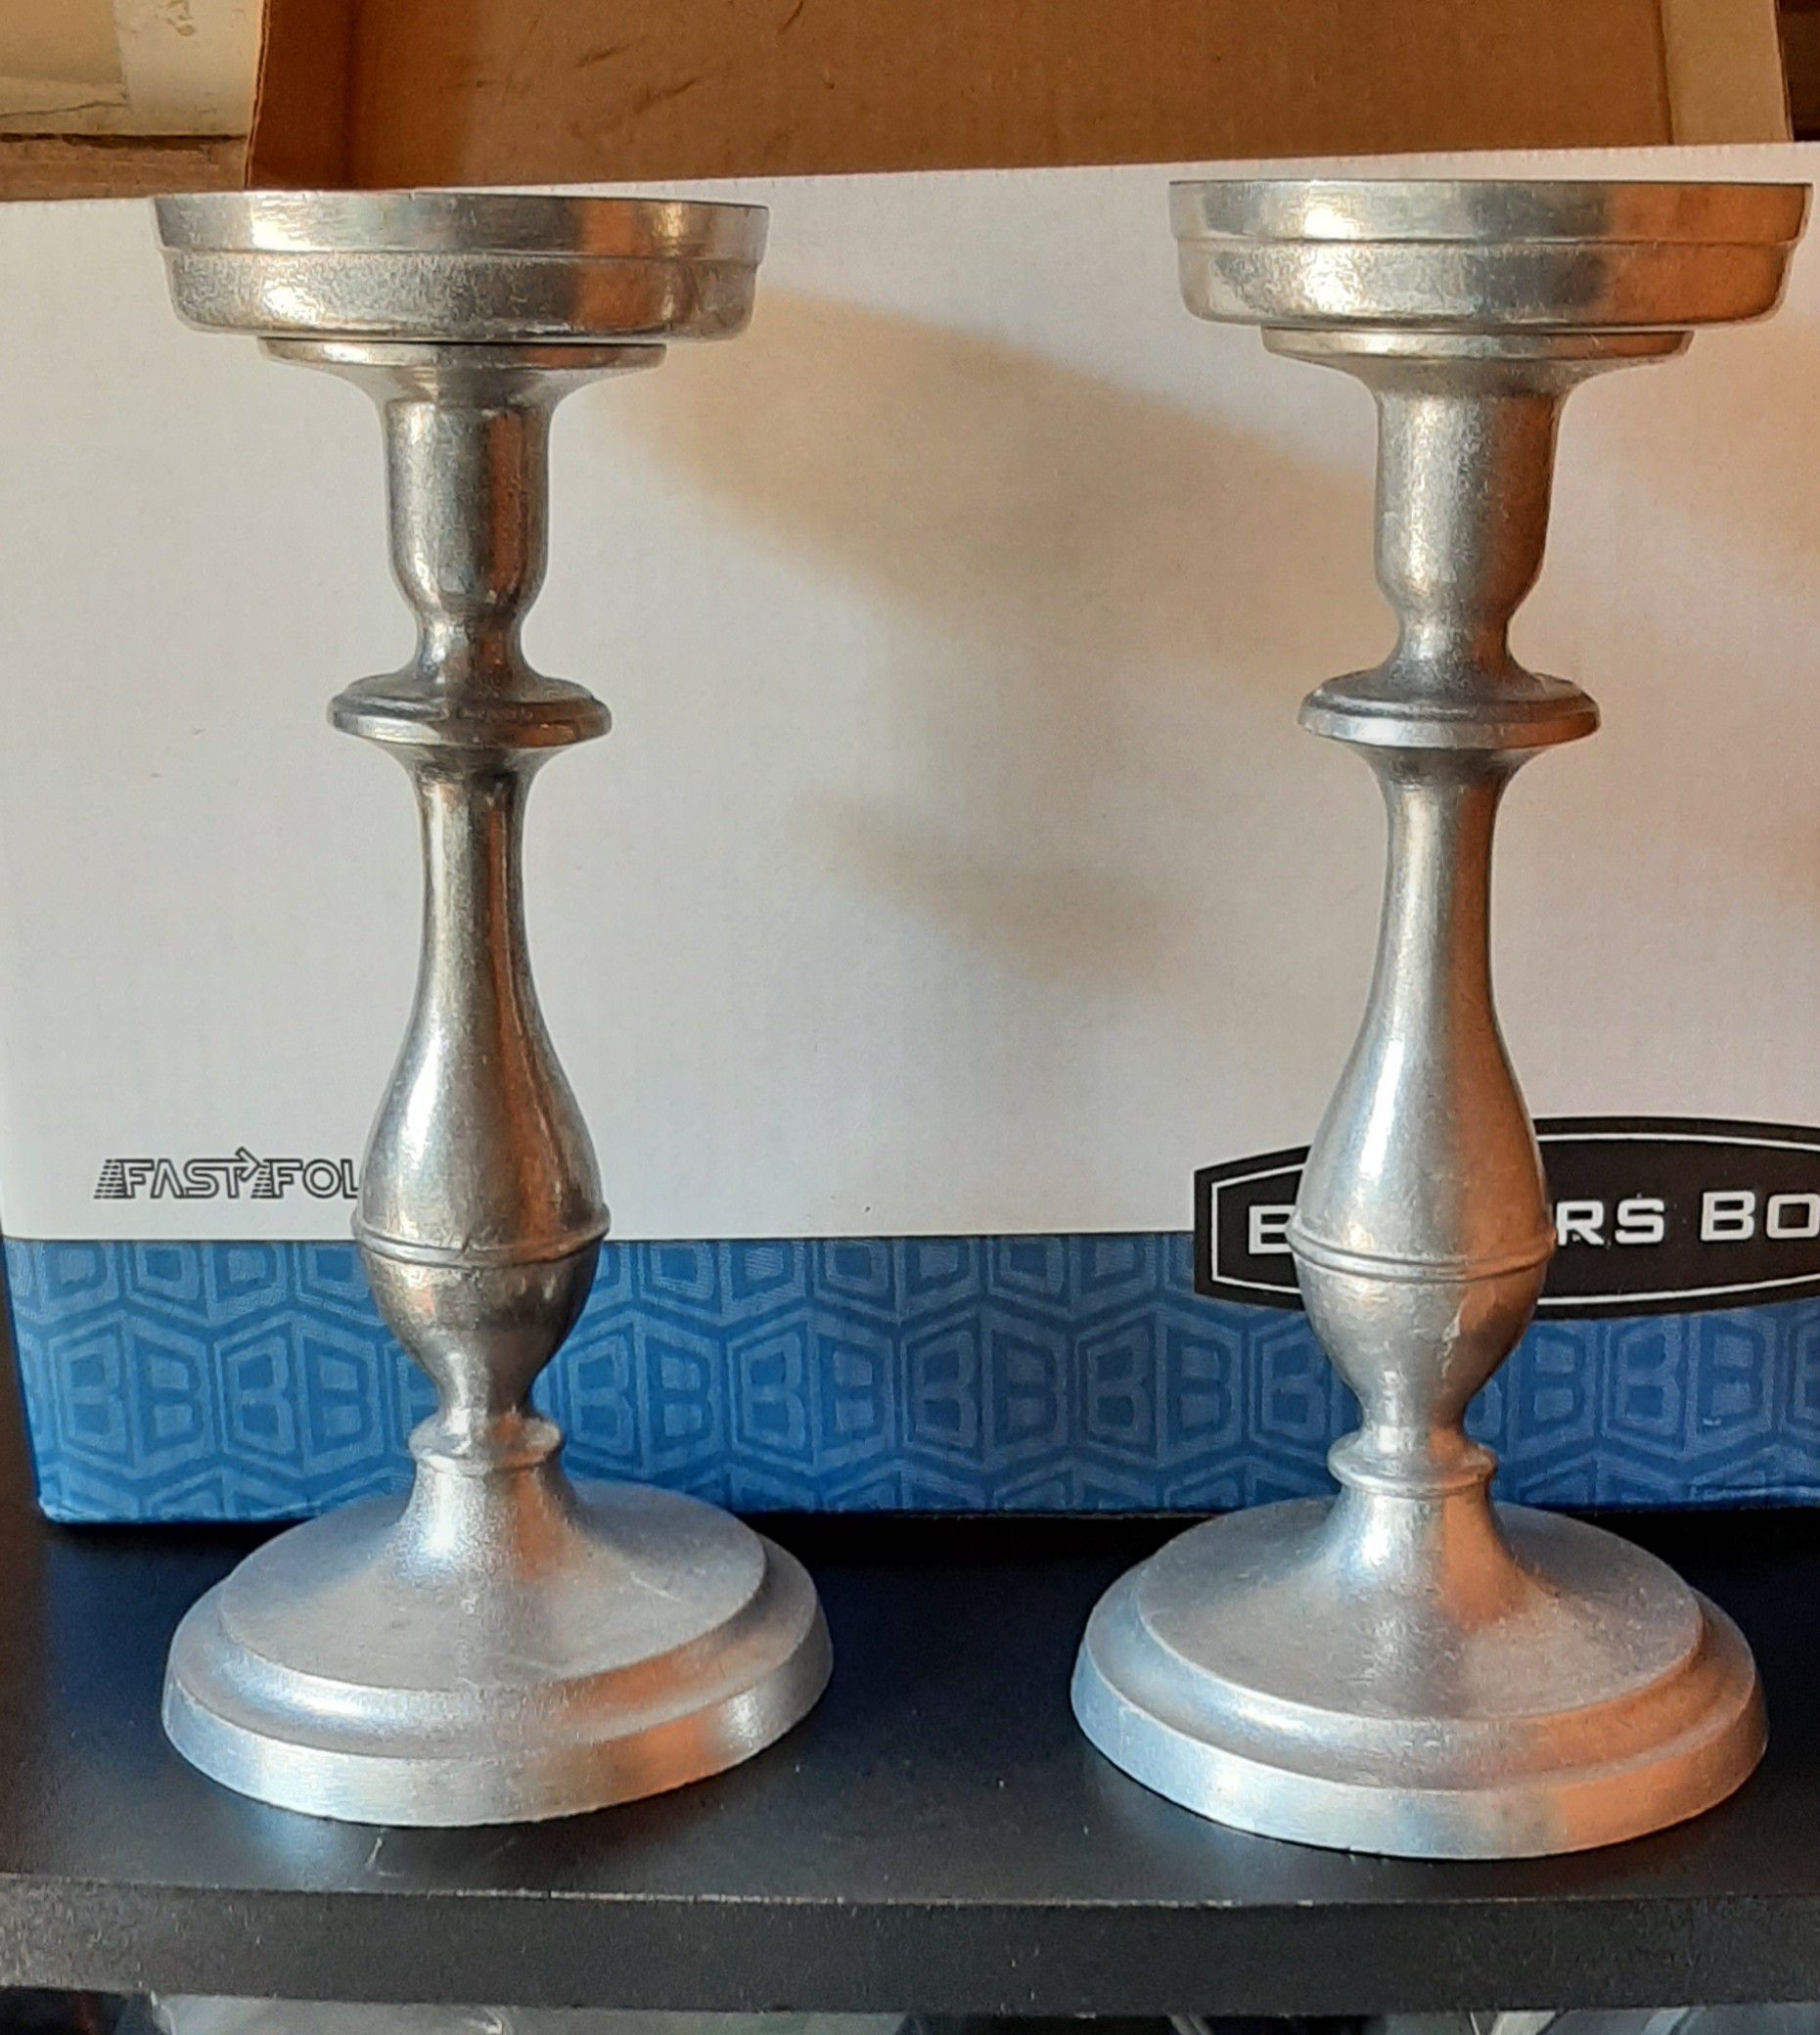 Pewter candlesticks suitable for tapers and pedestal candles with extra base added